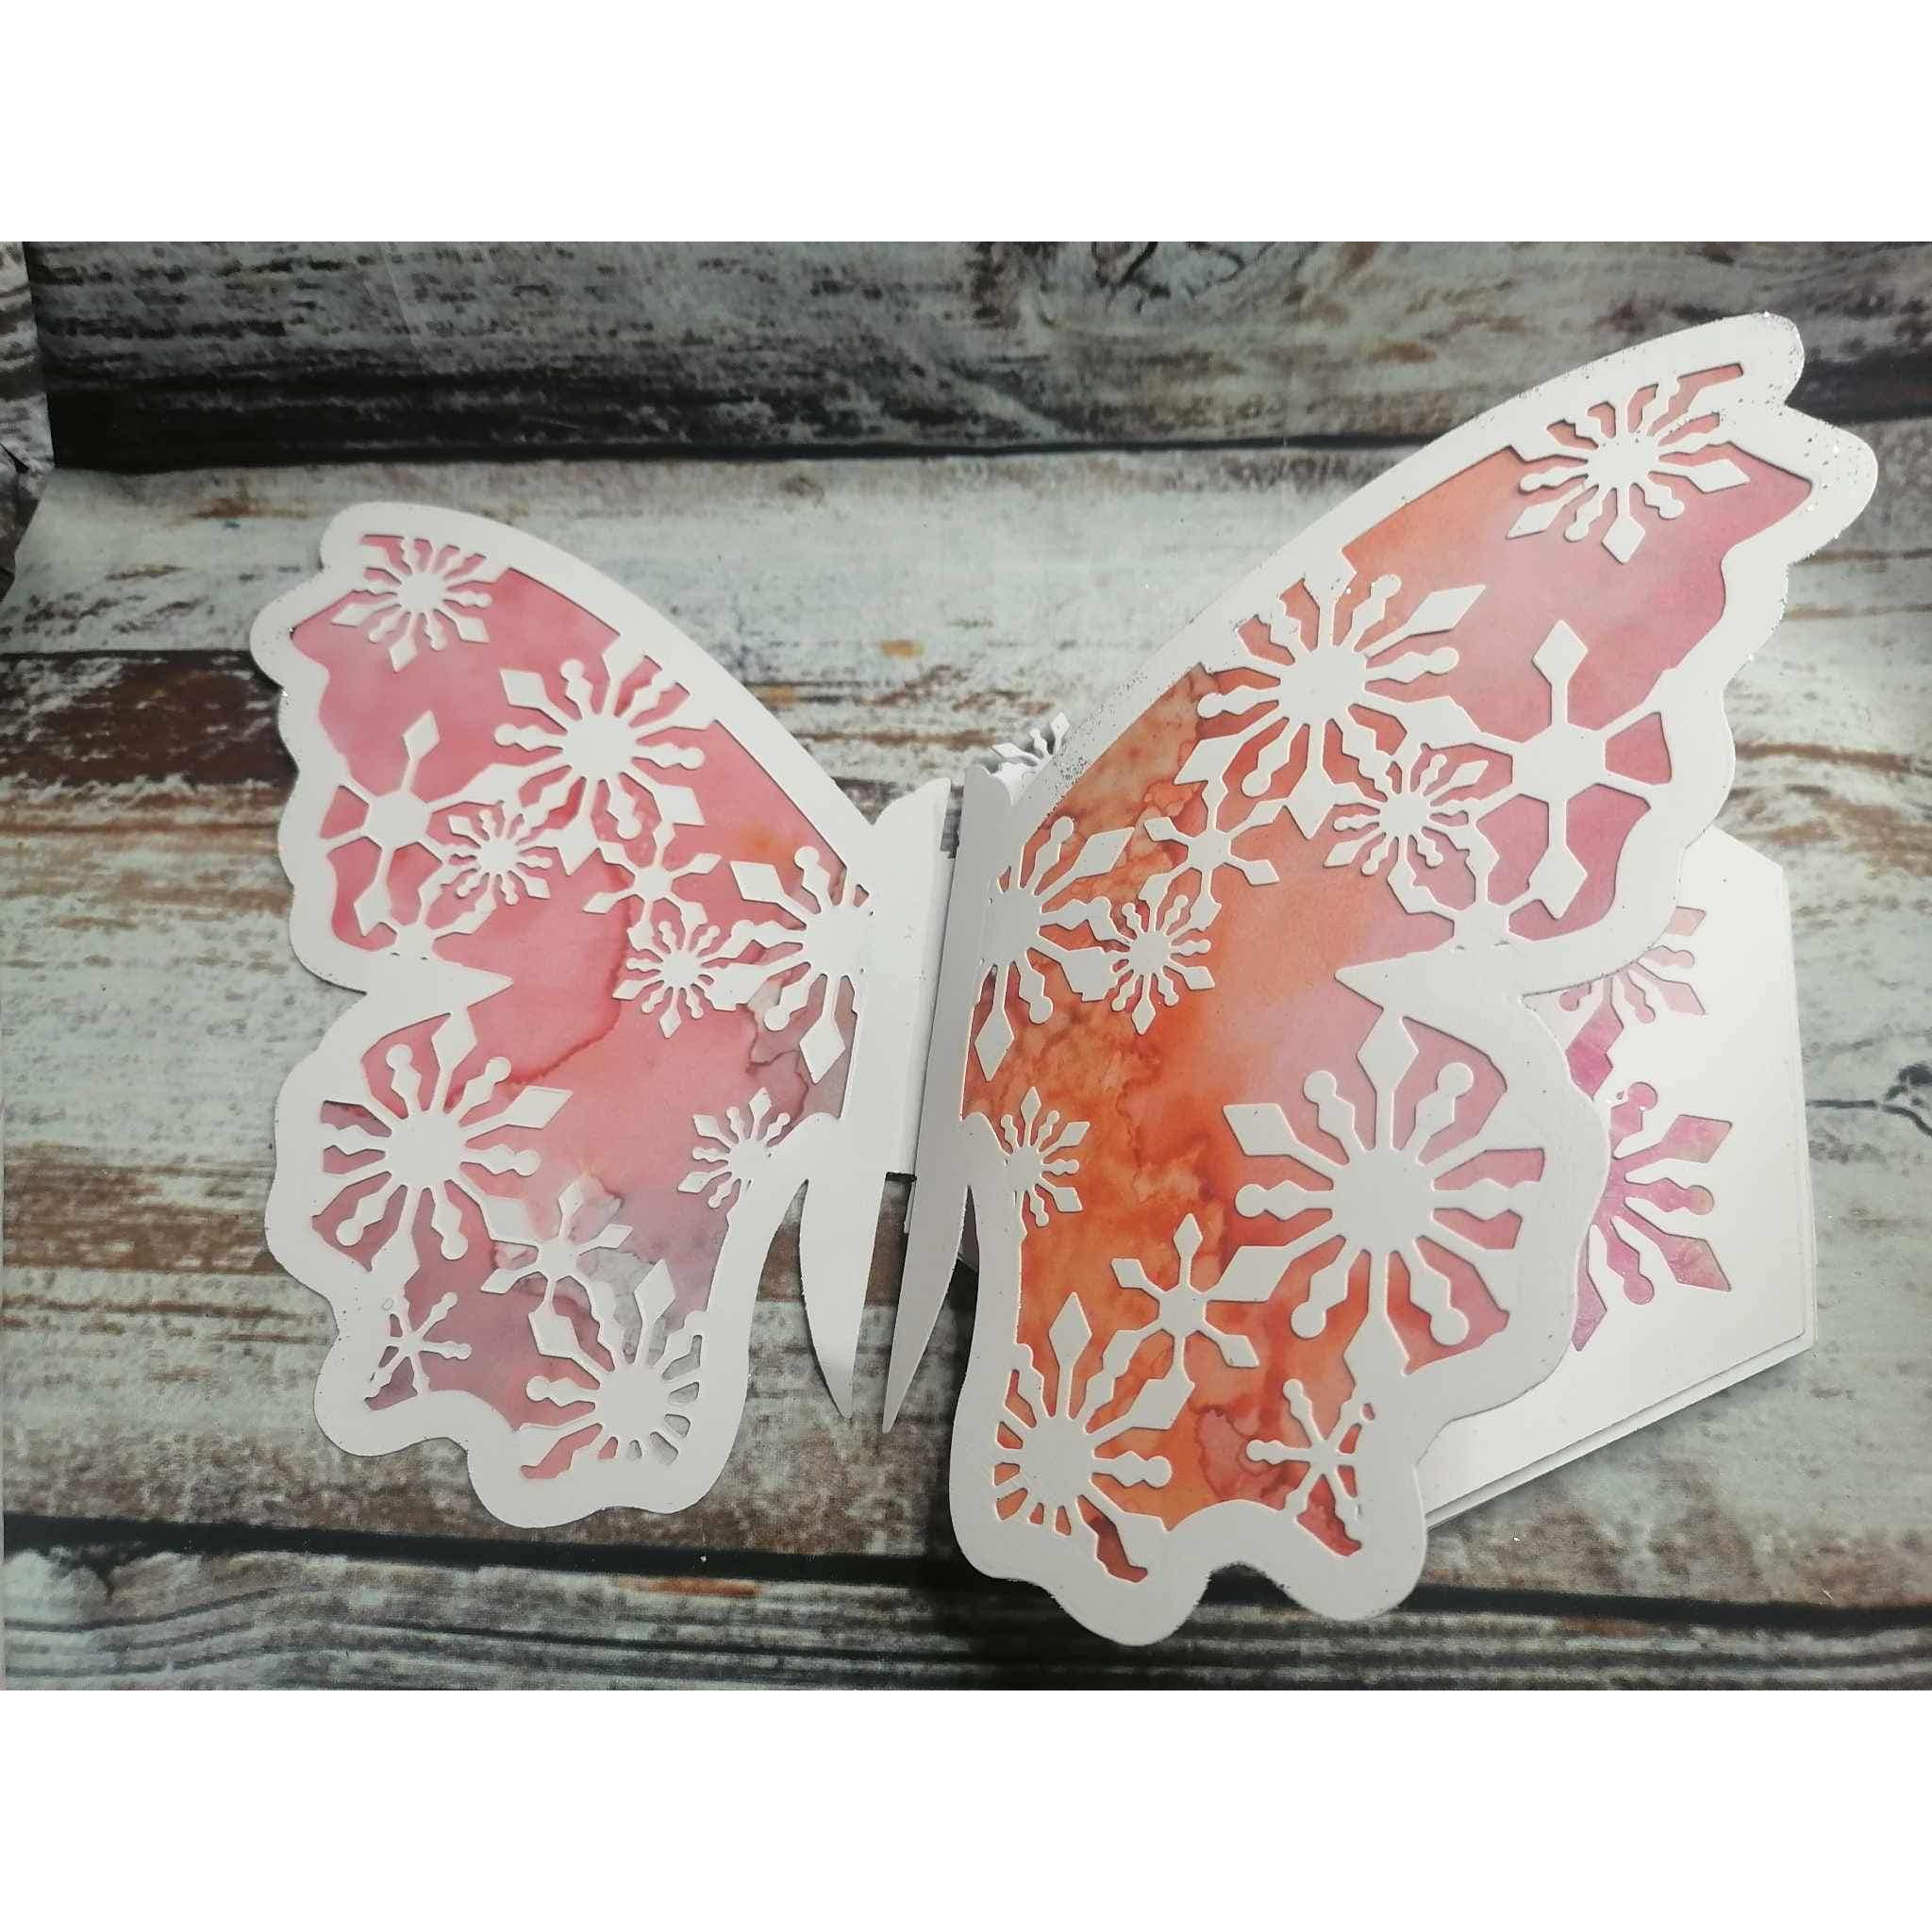 Miss P Loves Boundless Journal - Snowflake Butterfly